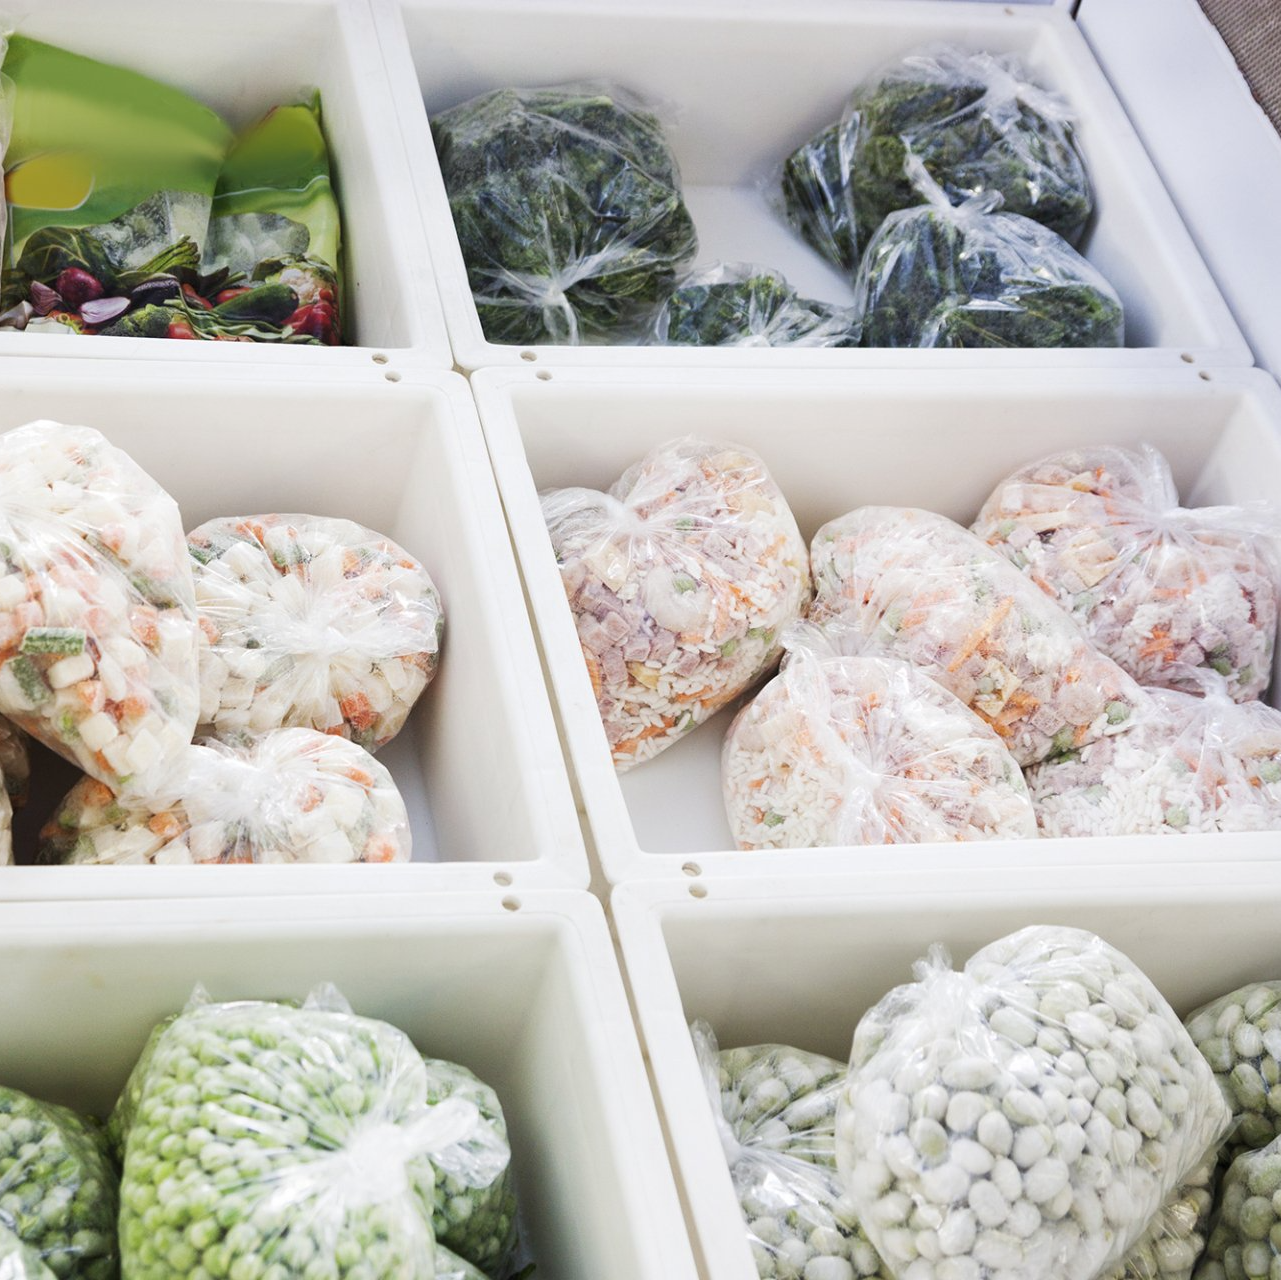 A variety of vegetables are displayed in plastic bags